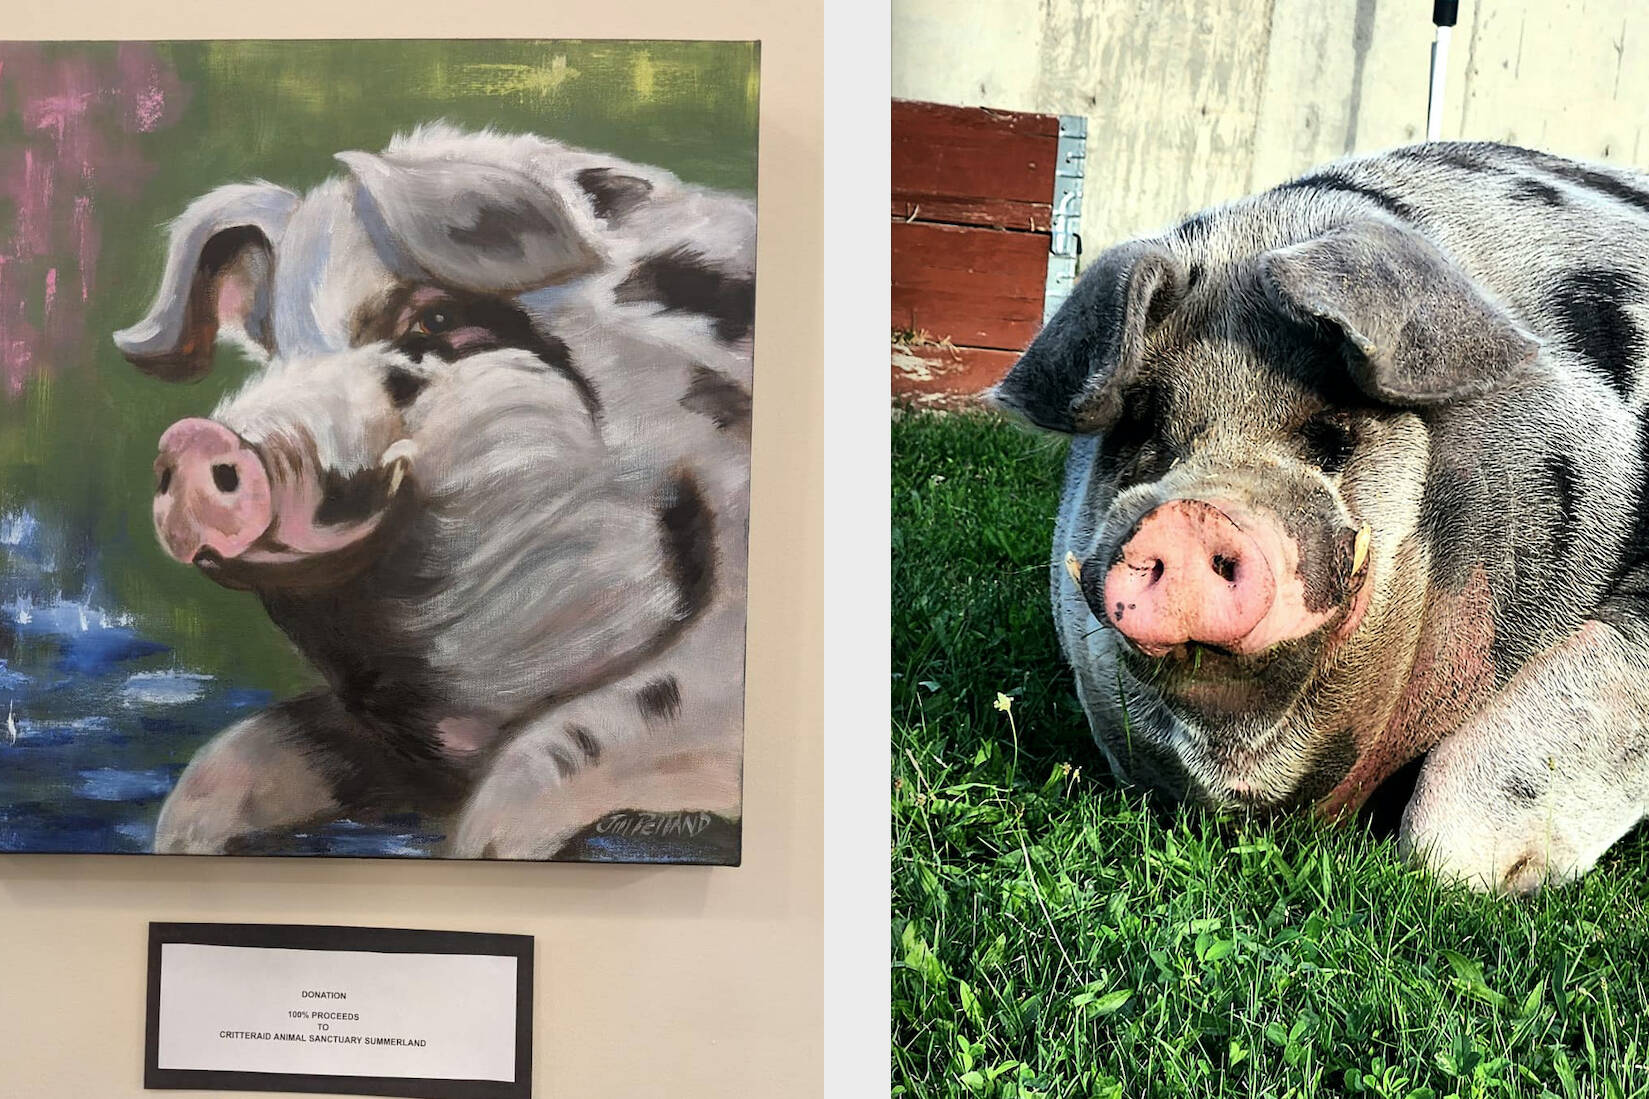 Well loved Critteraid animal sanctuary resident, Mr. Banks, the 1,100 pound pig celebrates his birthday while a portrait of him now hangs in the Summerland Credit Union. (Critteraid photos)